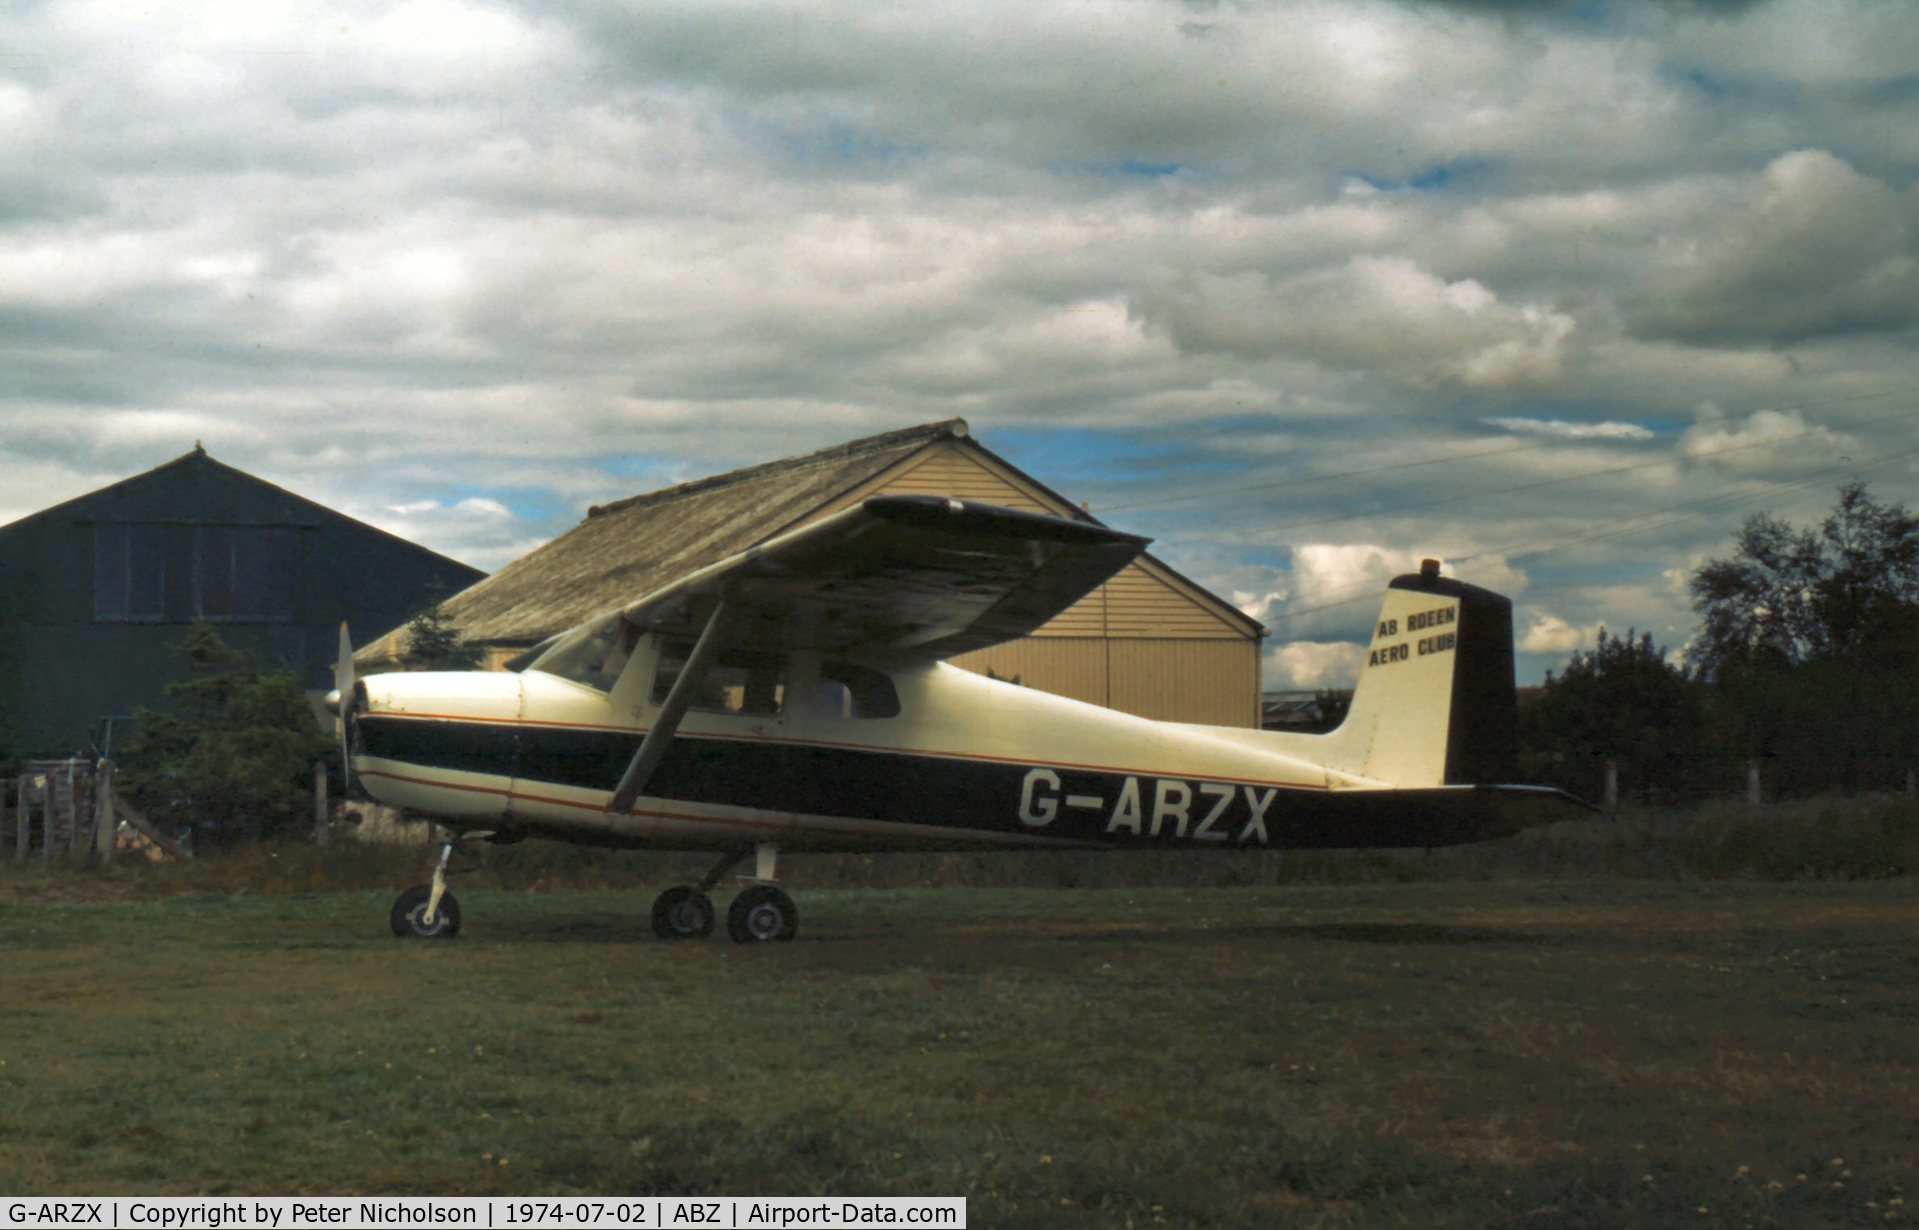 G-ARZX, 1962 Cessna 150B C/N 150-59642, Aberdeen Flying Club's Cessna 150B seen at its home base in the Summer of 1974.